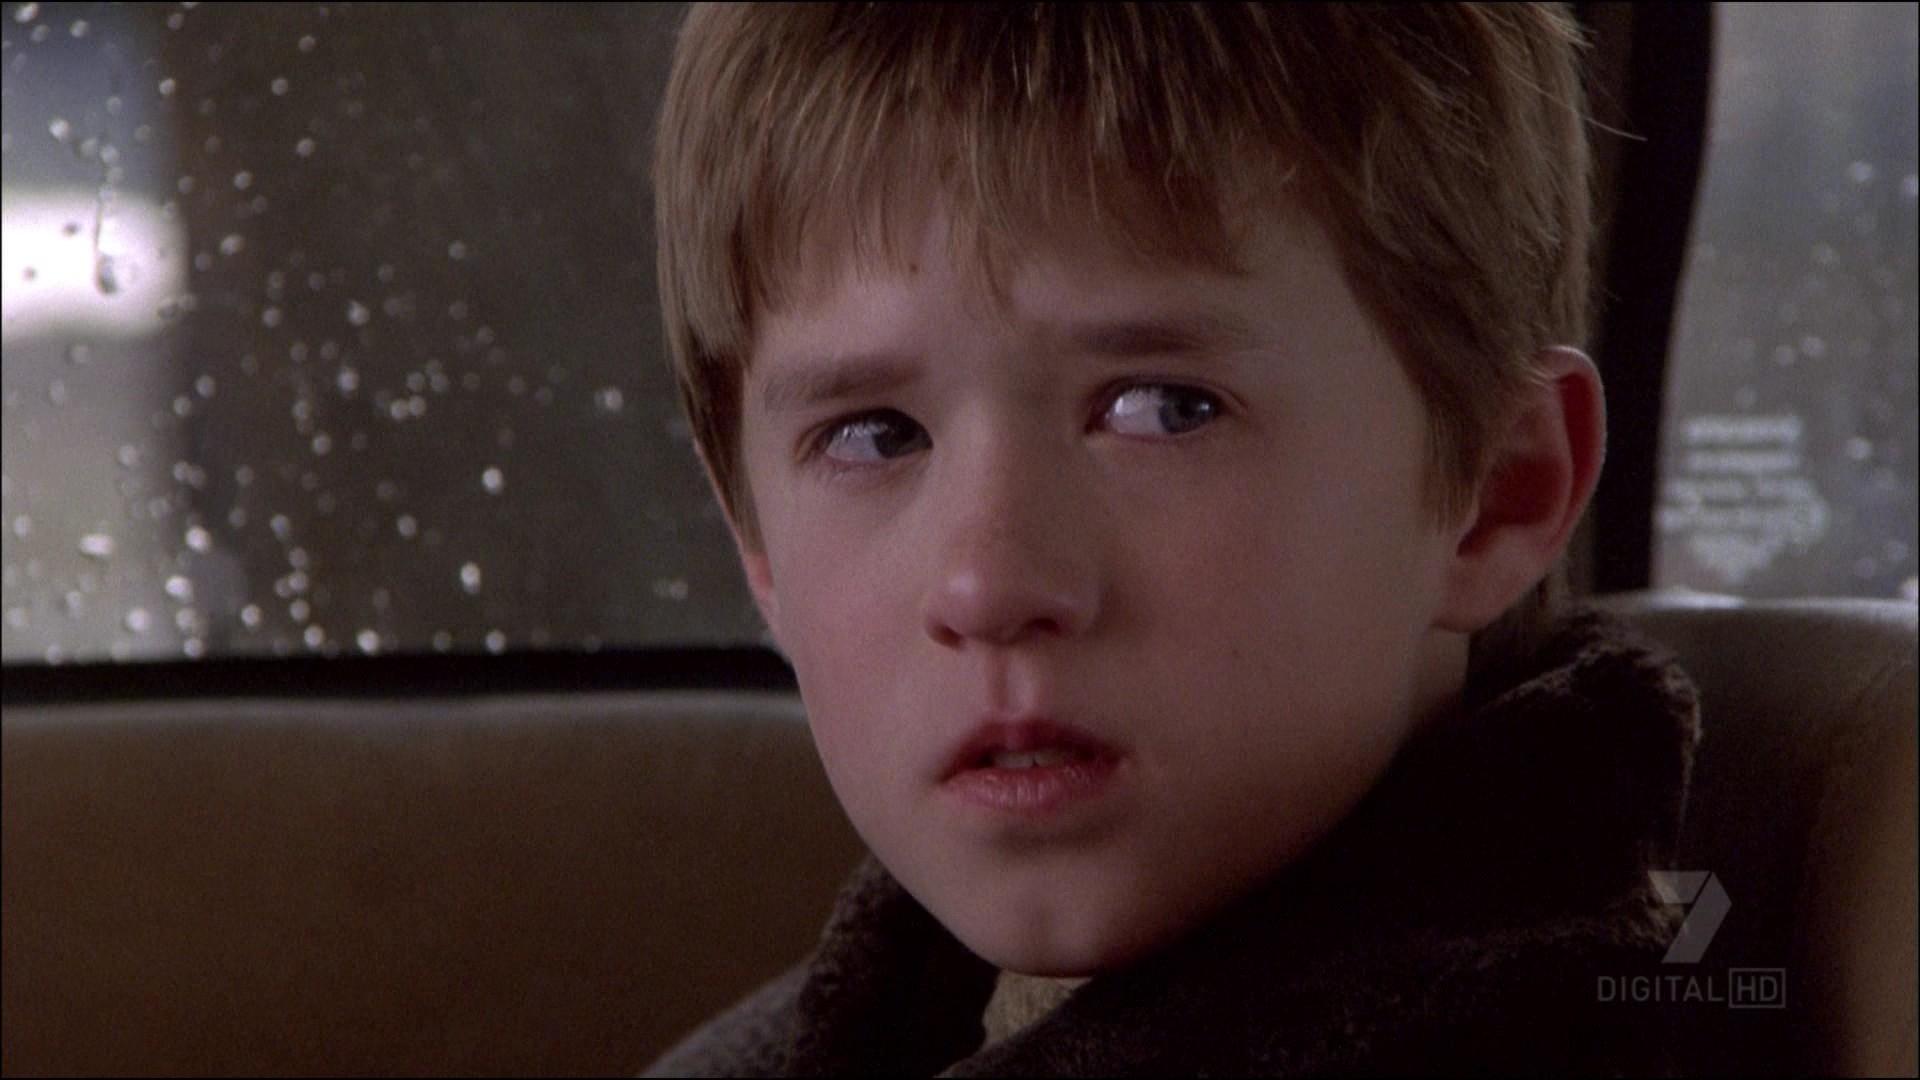 The Sixth Sense' Surprise Ending Is Obvious If You Pay Attention To